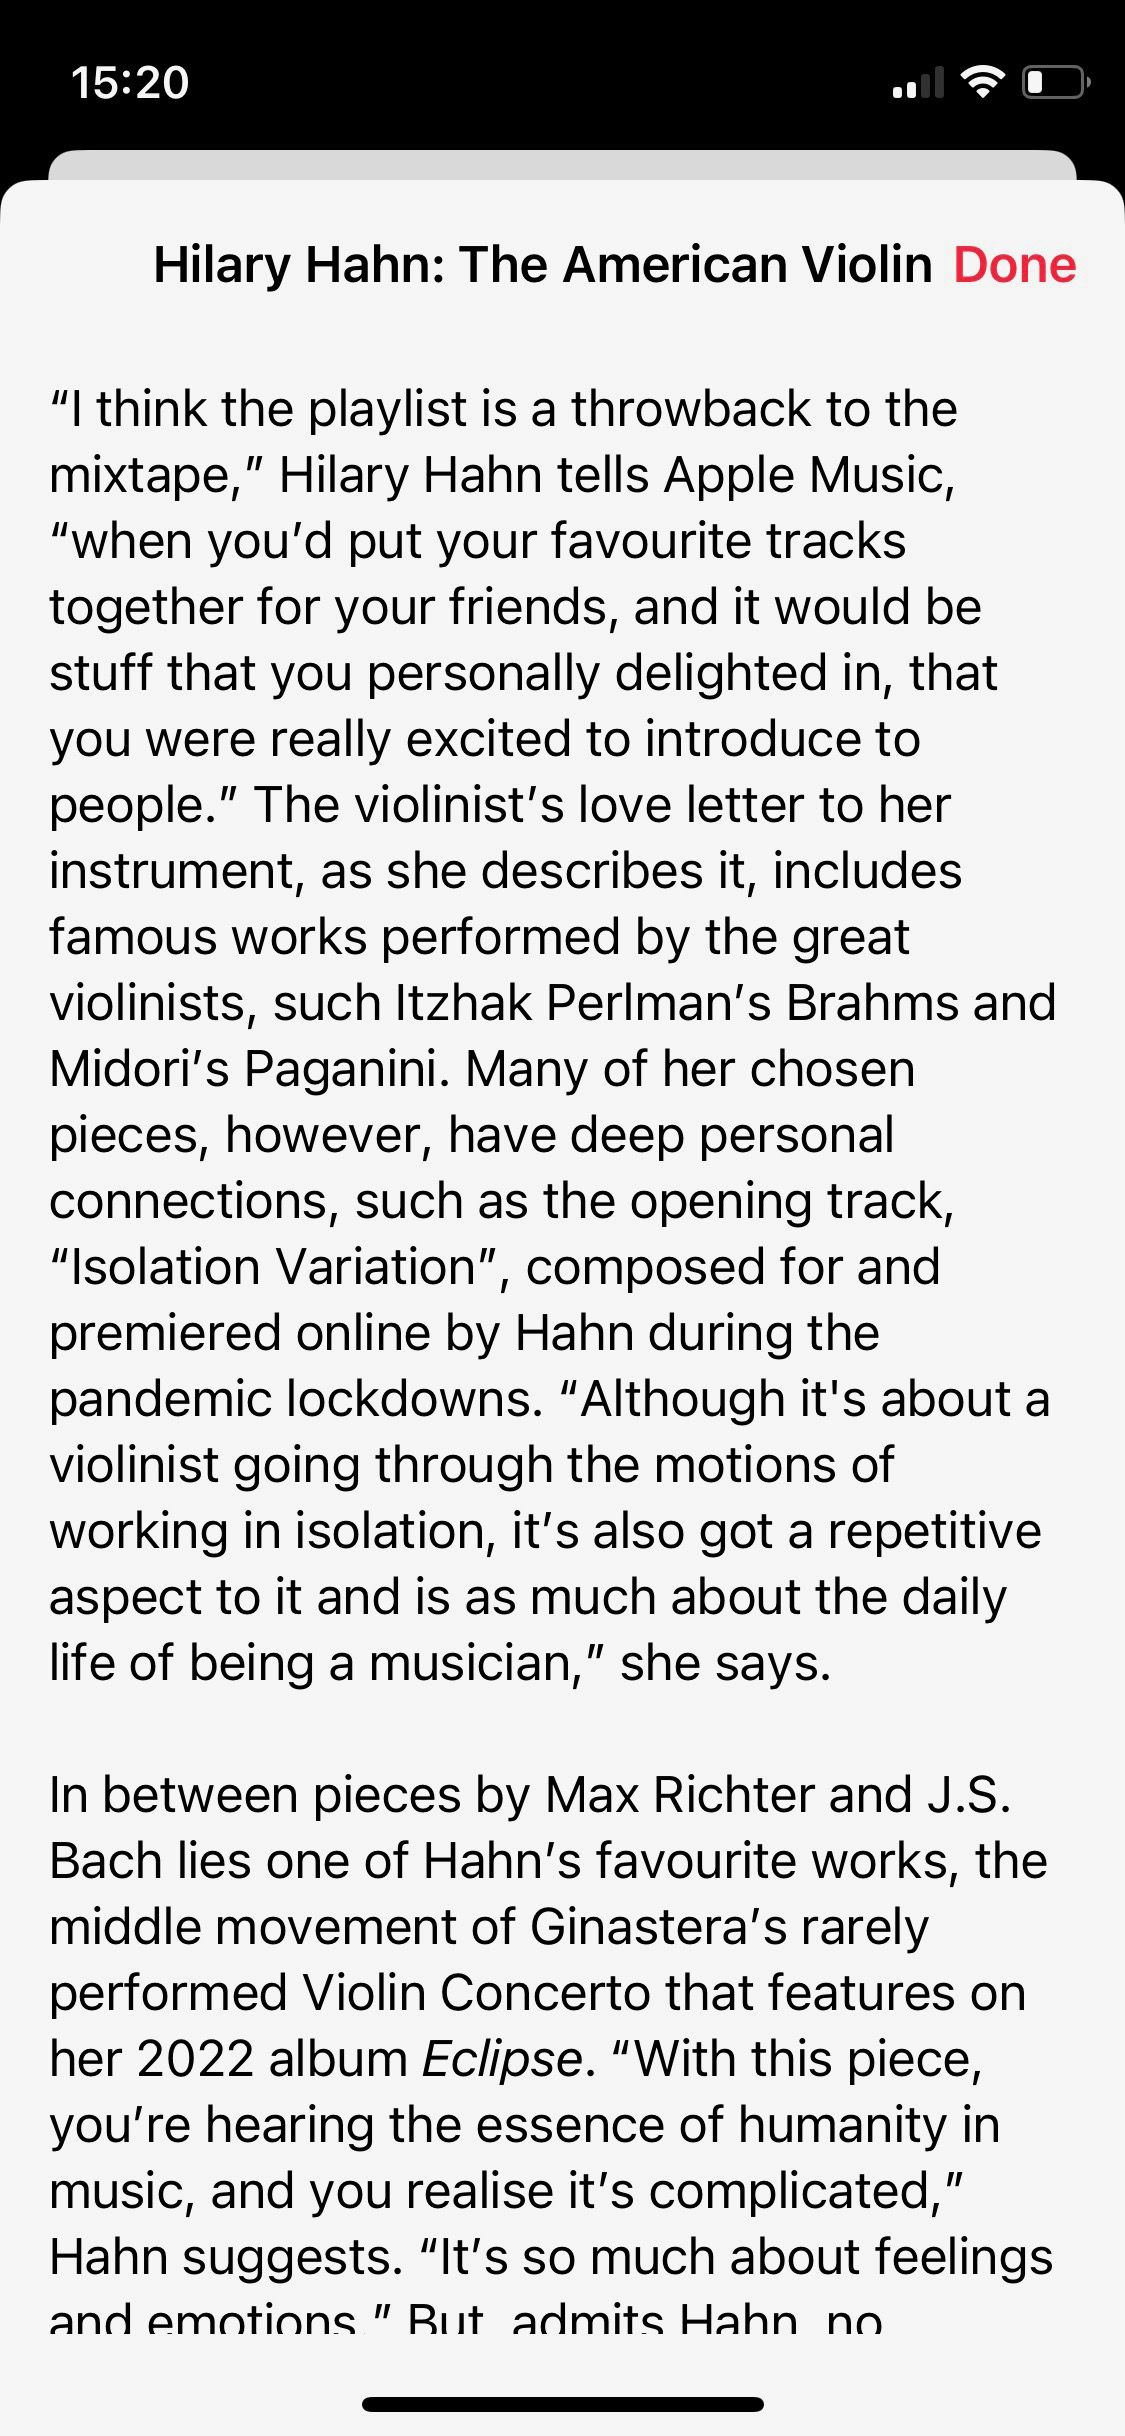 Screenshot of Apple Music Classical Curated collection by Hilary Hahn